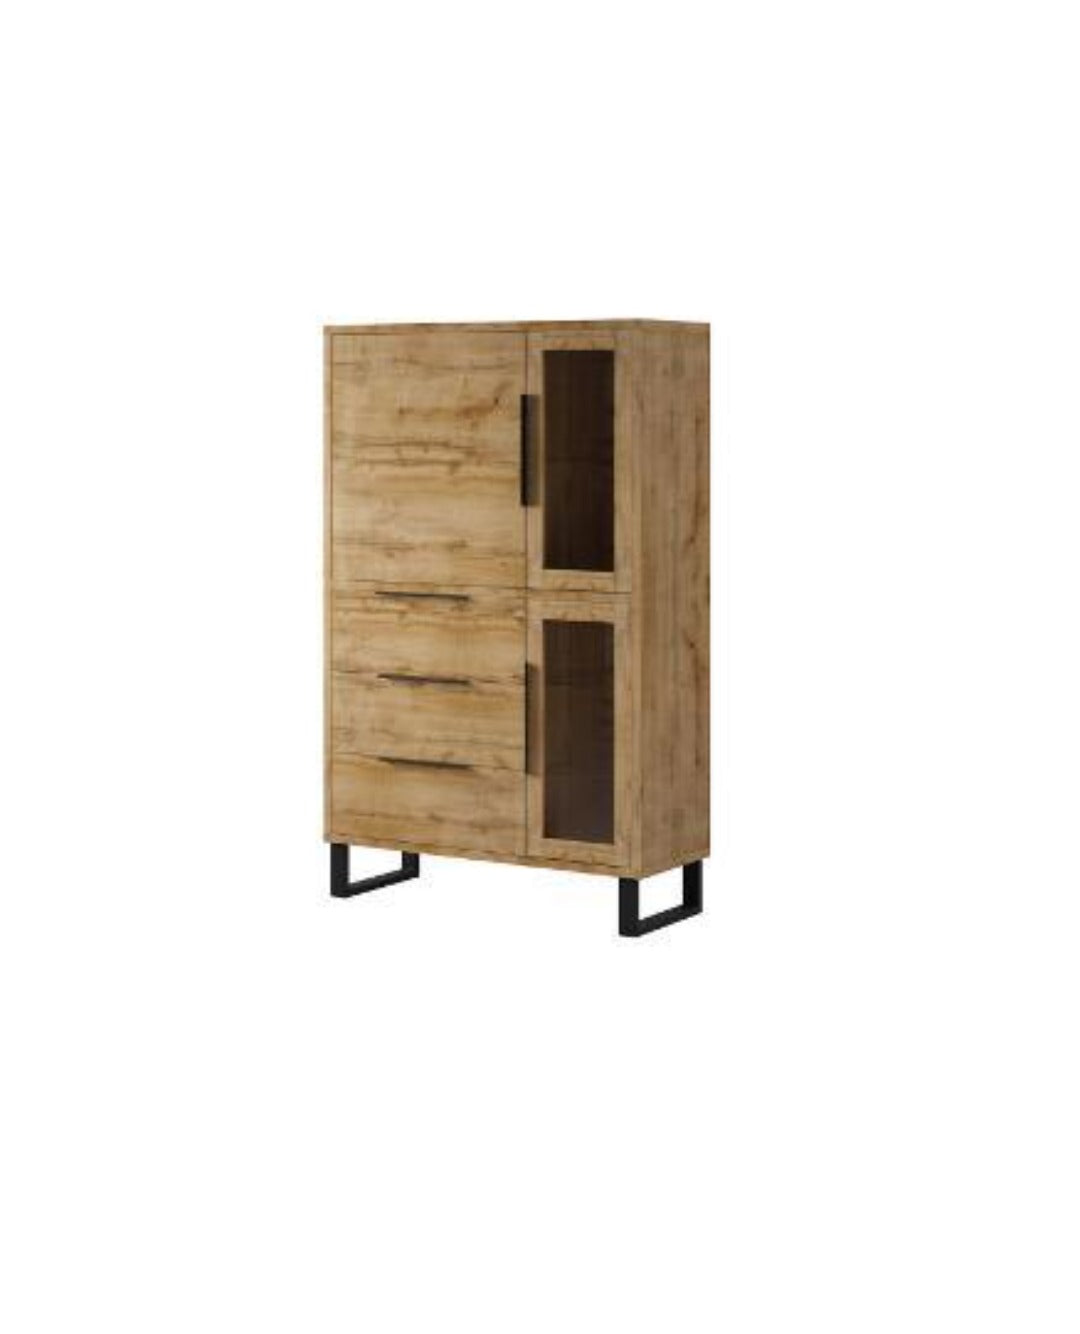 Halle 12 Tall Display Cabinet - £527.4 - Living Room Display Cabinet 